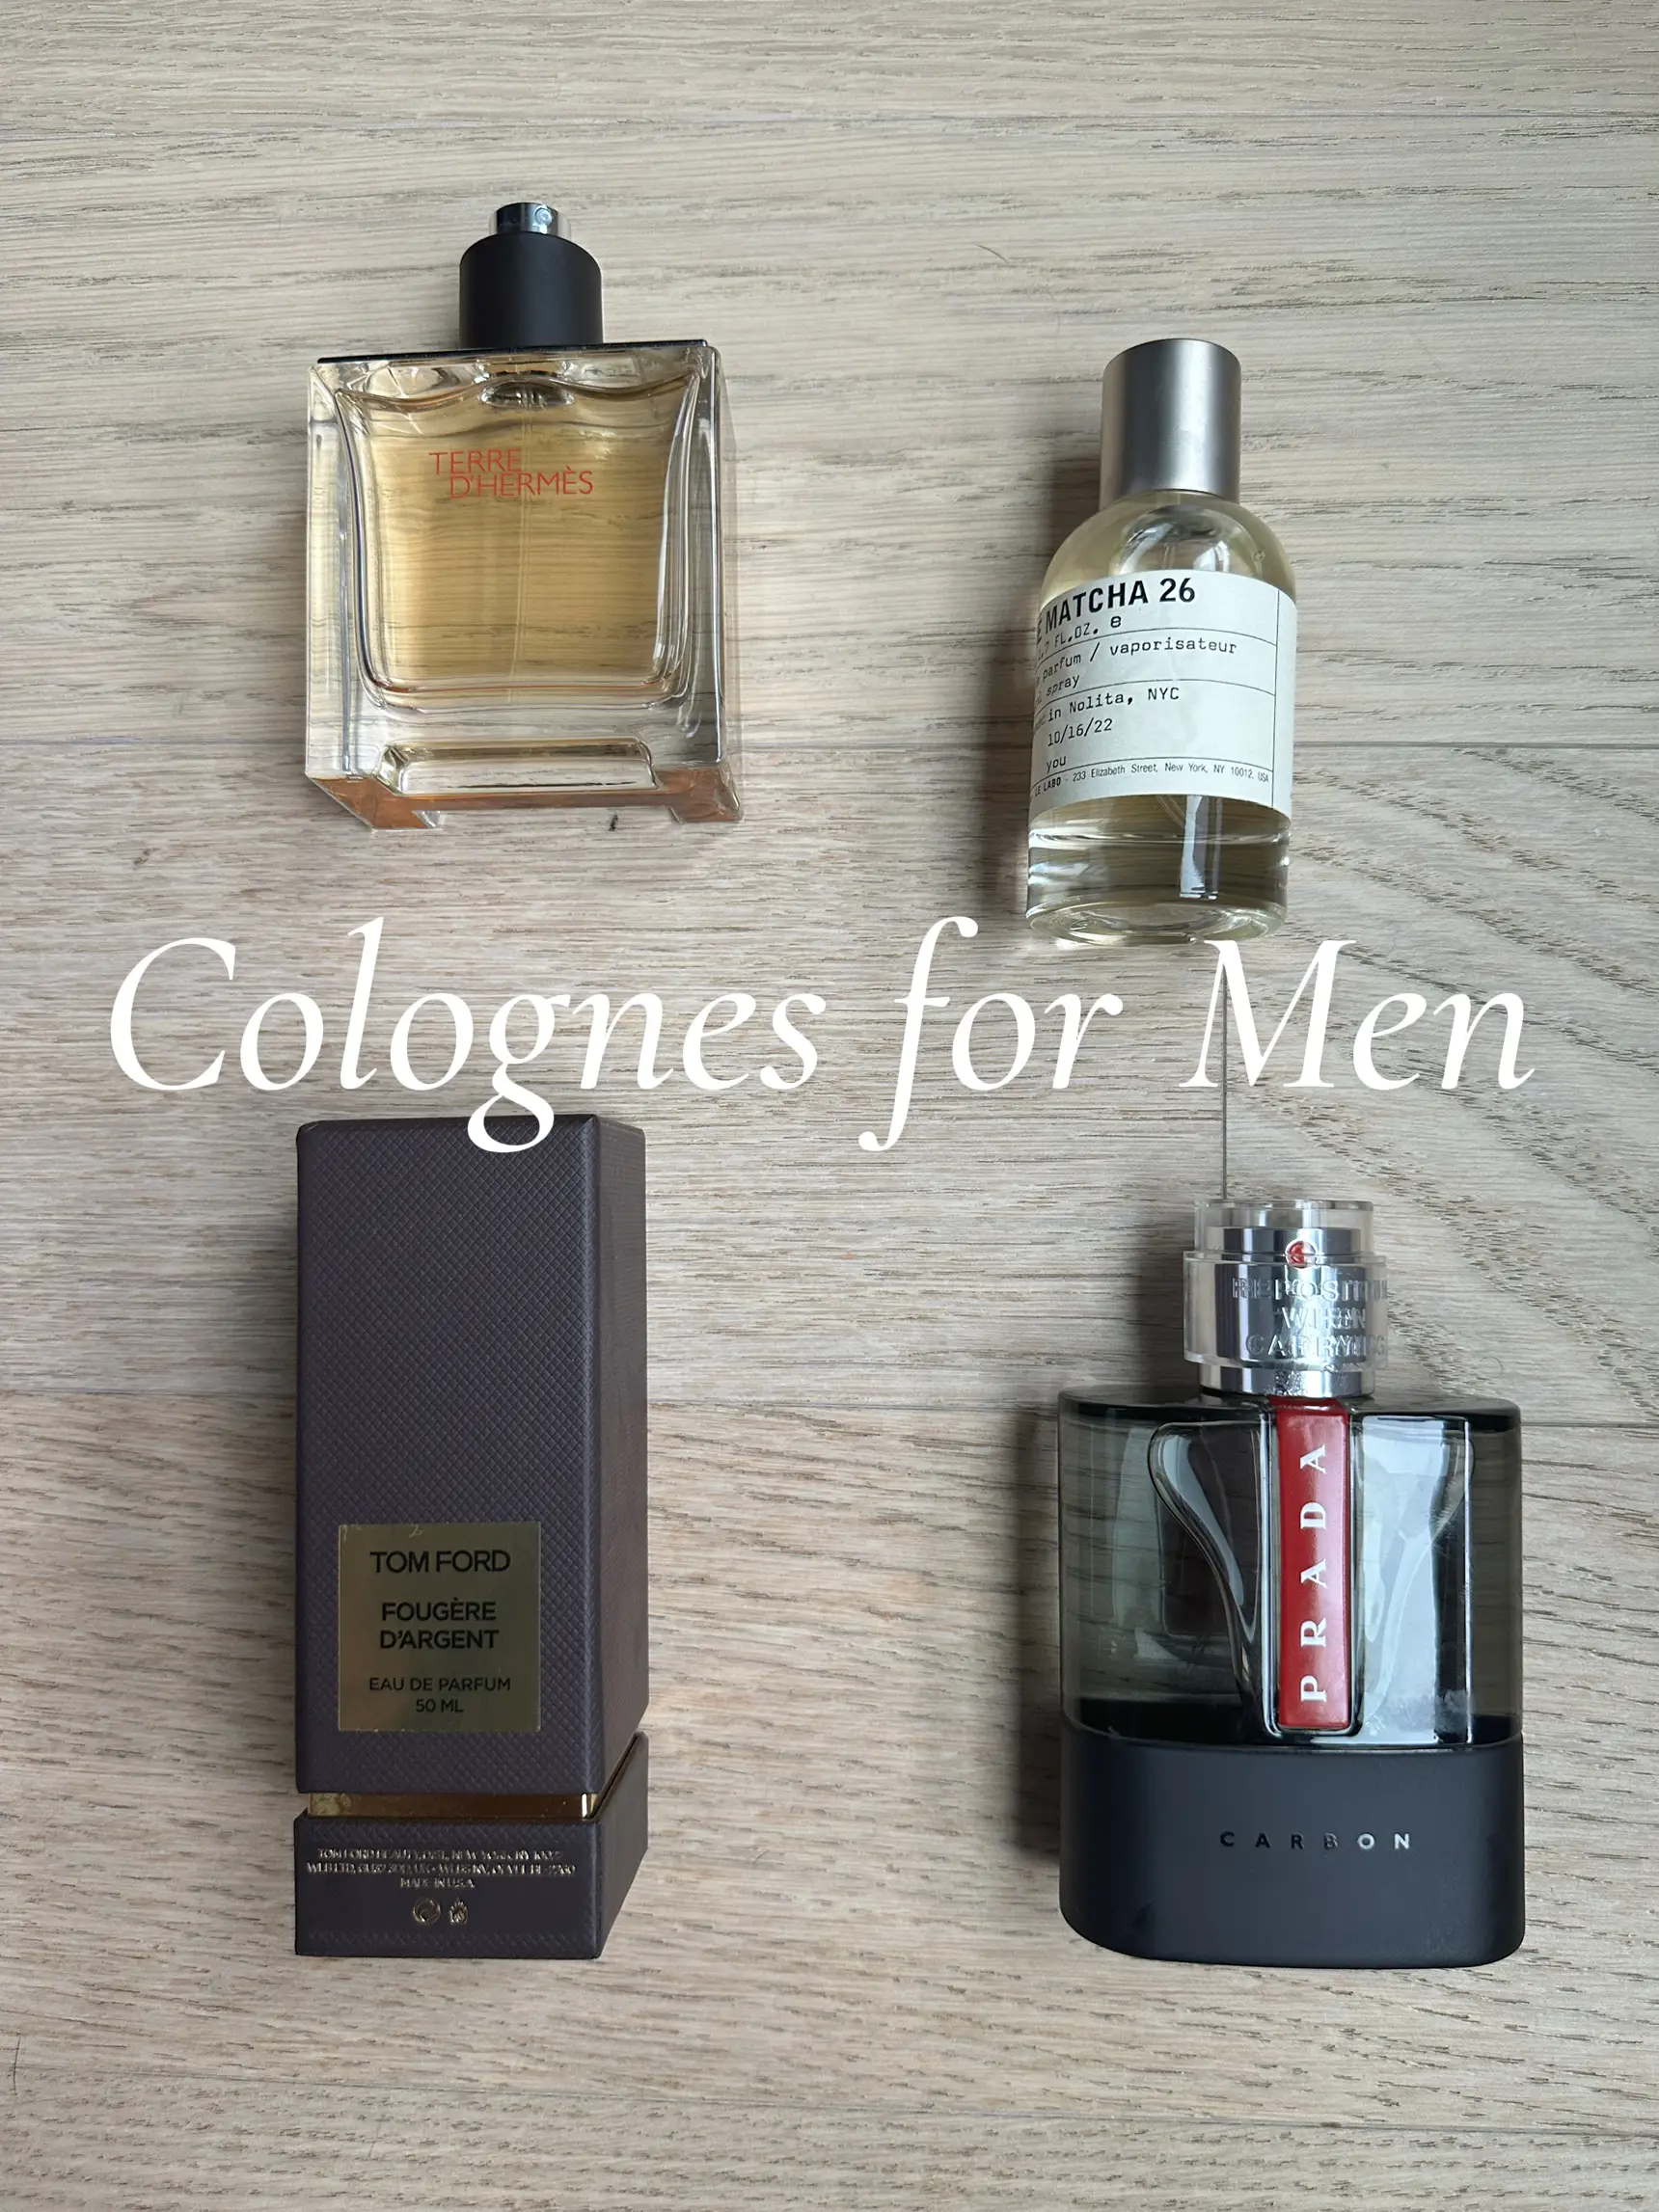 These are just the basics I know #cologne #menslifestyle